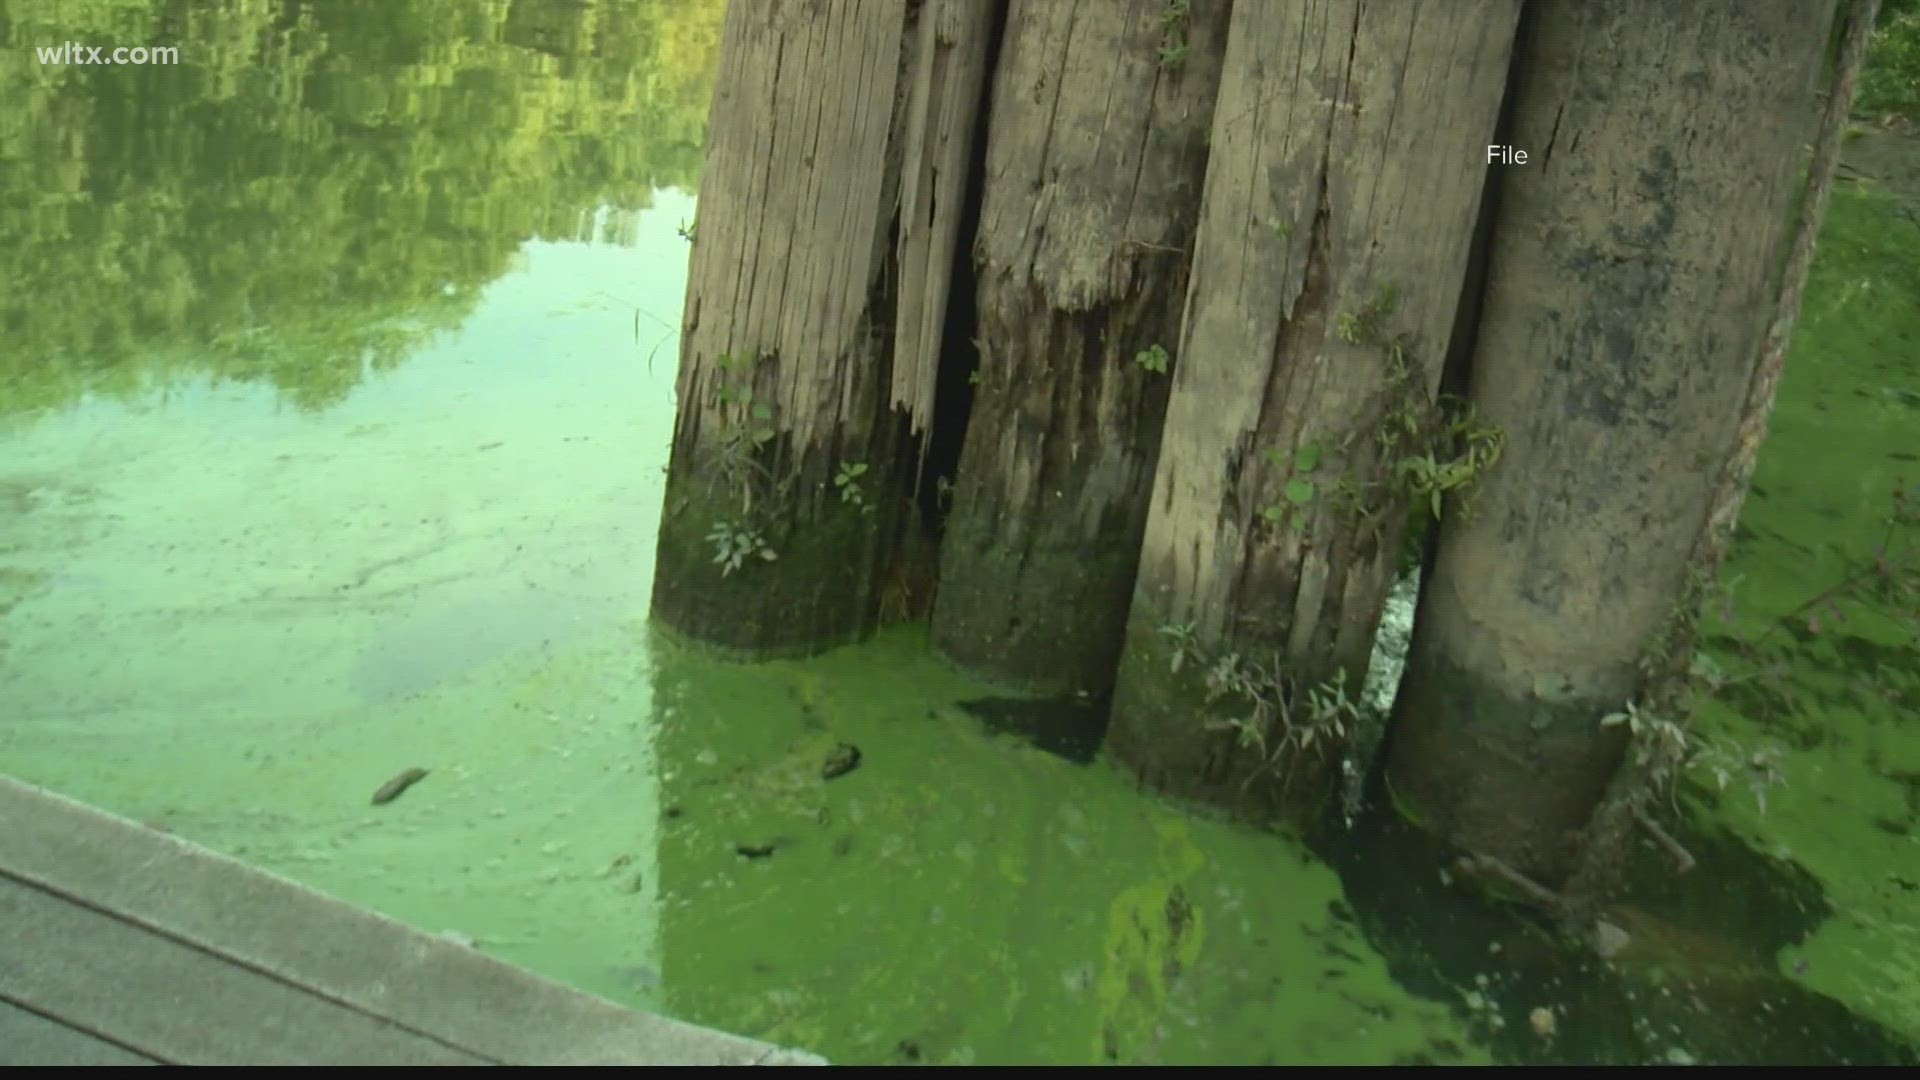 DHEC says they have observed algae blooms in the lake. Officials say the extent of the algae bloom is not completely known.